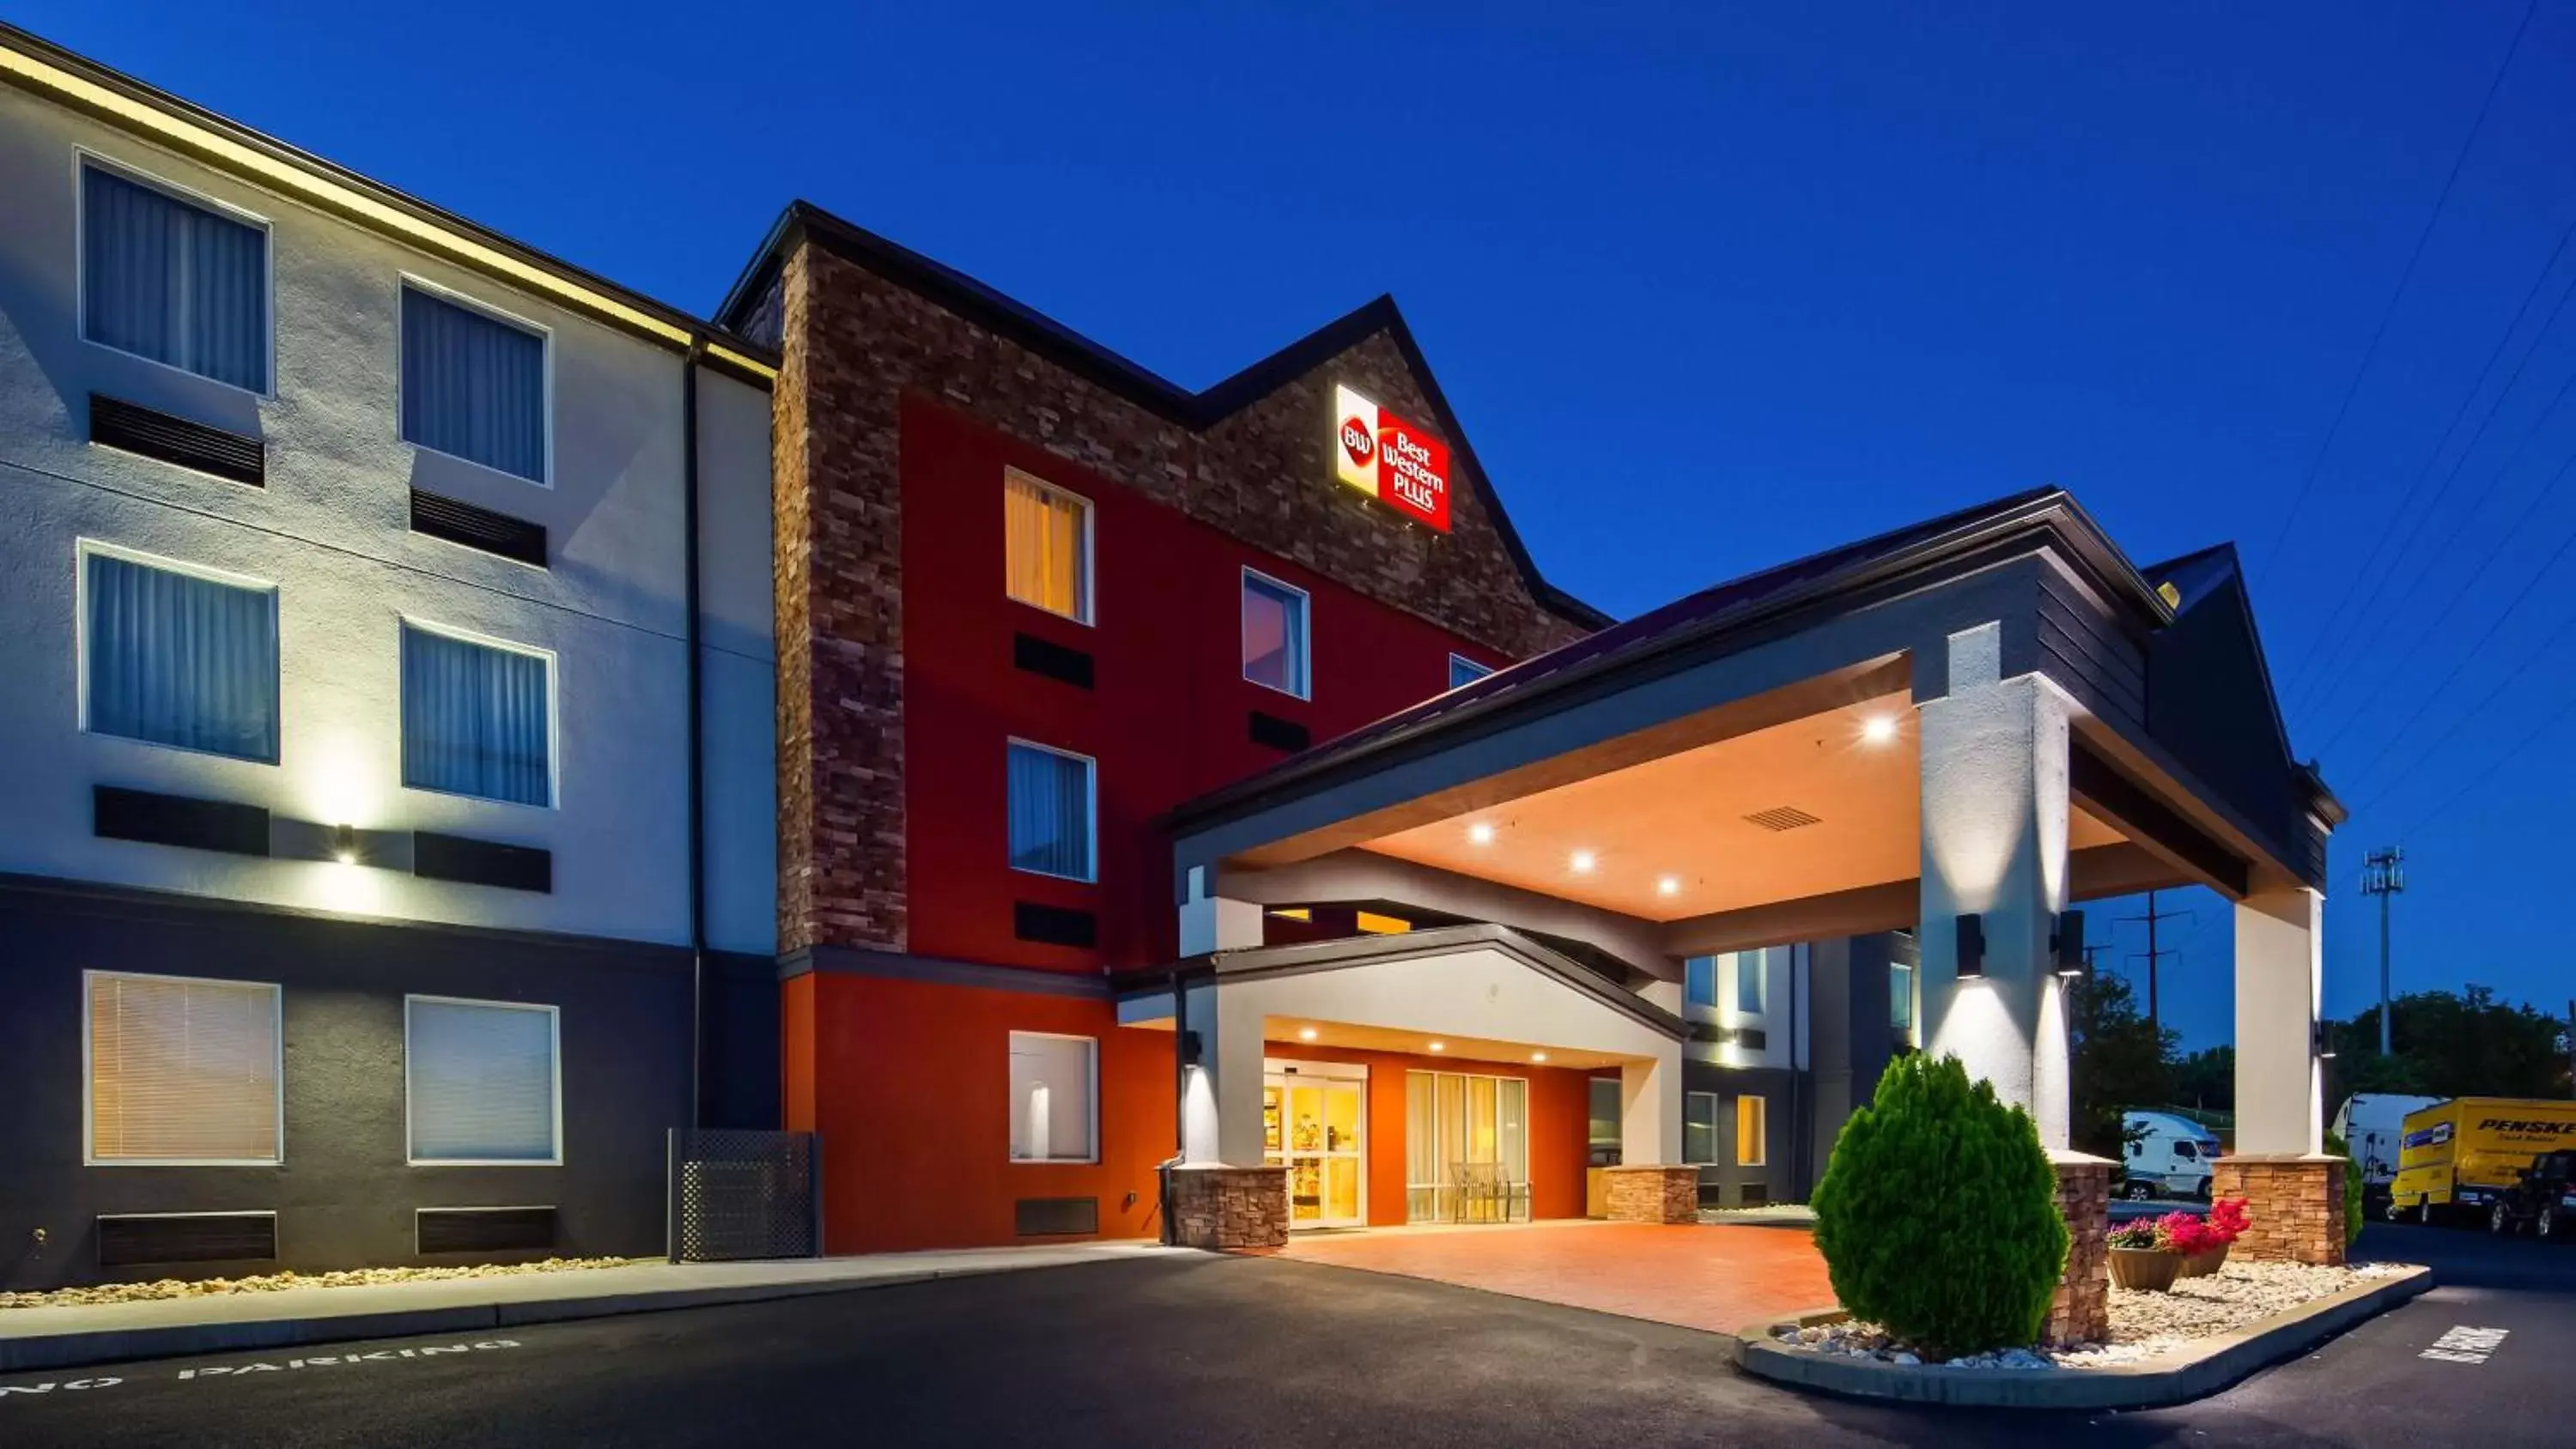 Property Building in Best Western Plus New Cumberland